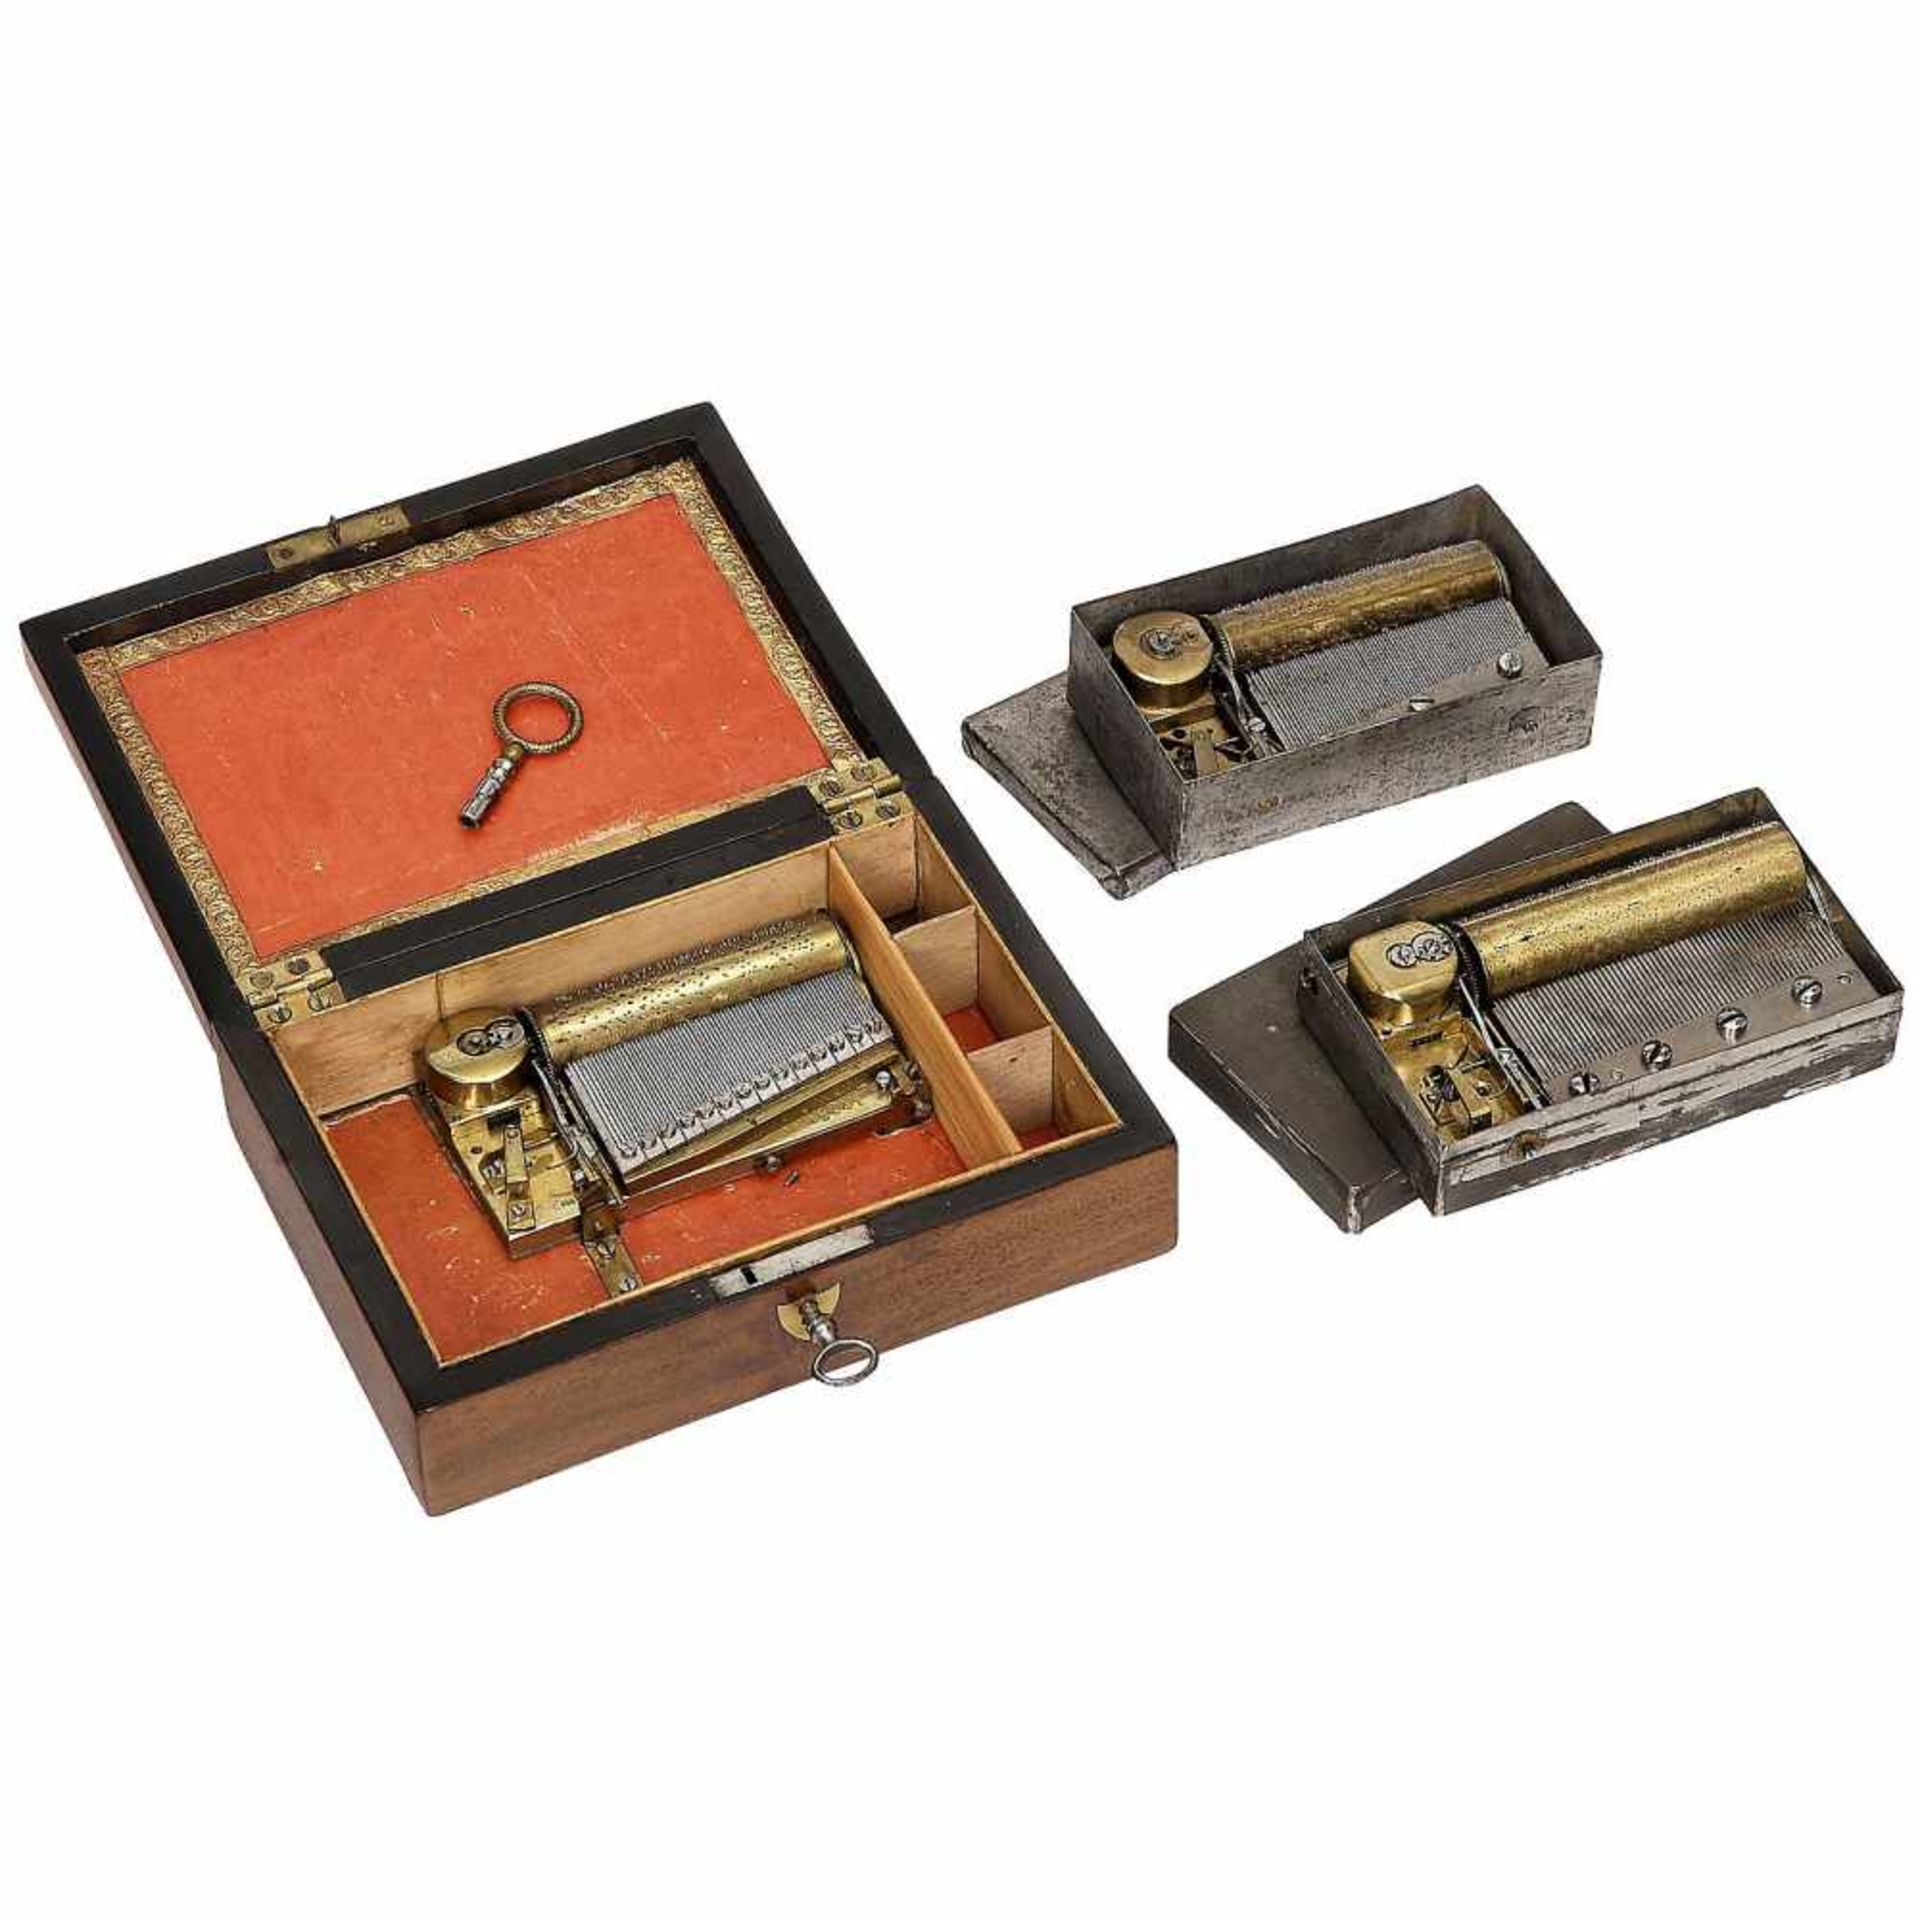 3 Tabatière Musical Boxes1) Two-air movement with sectional comb, No. 13641, bedplate stamped "